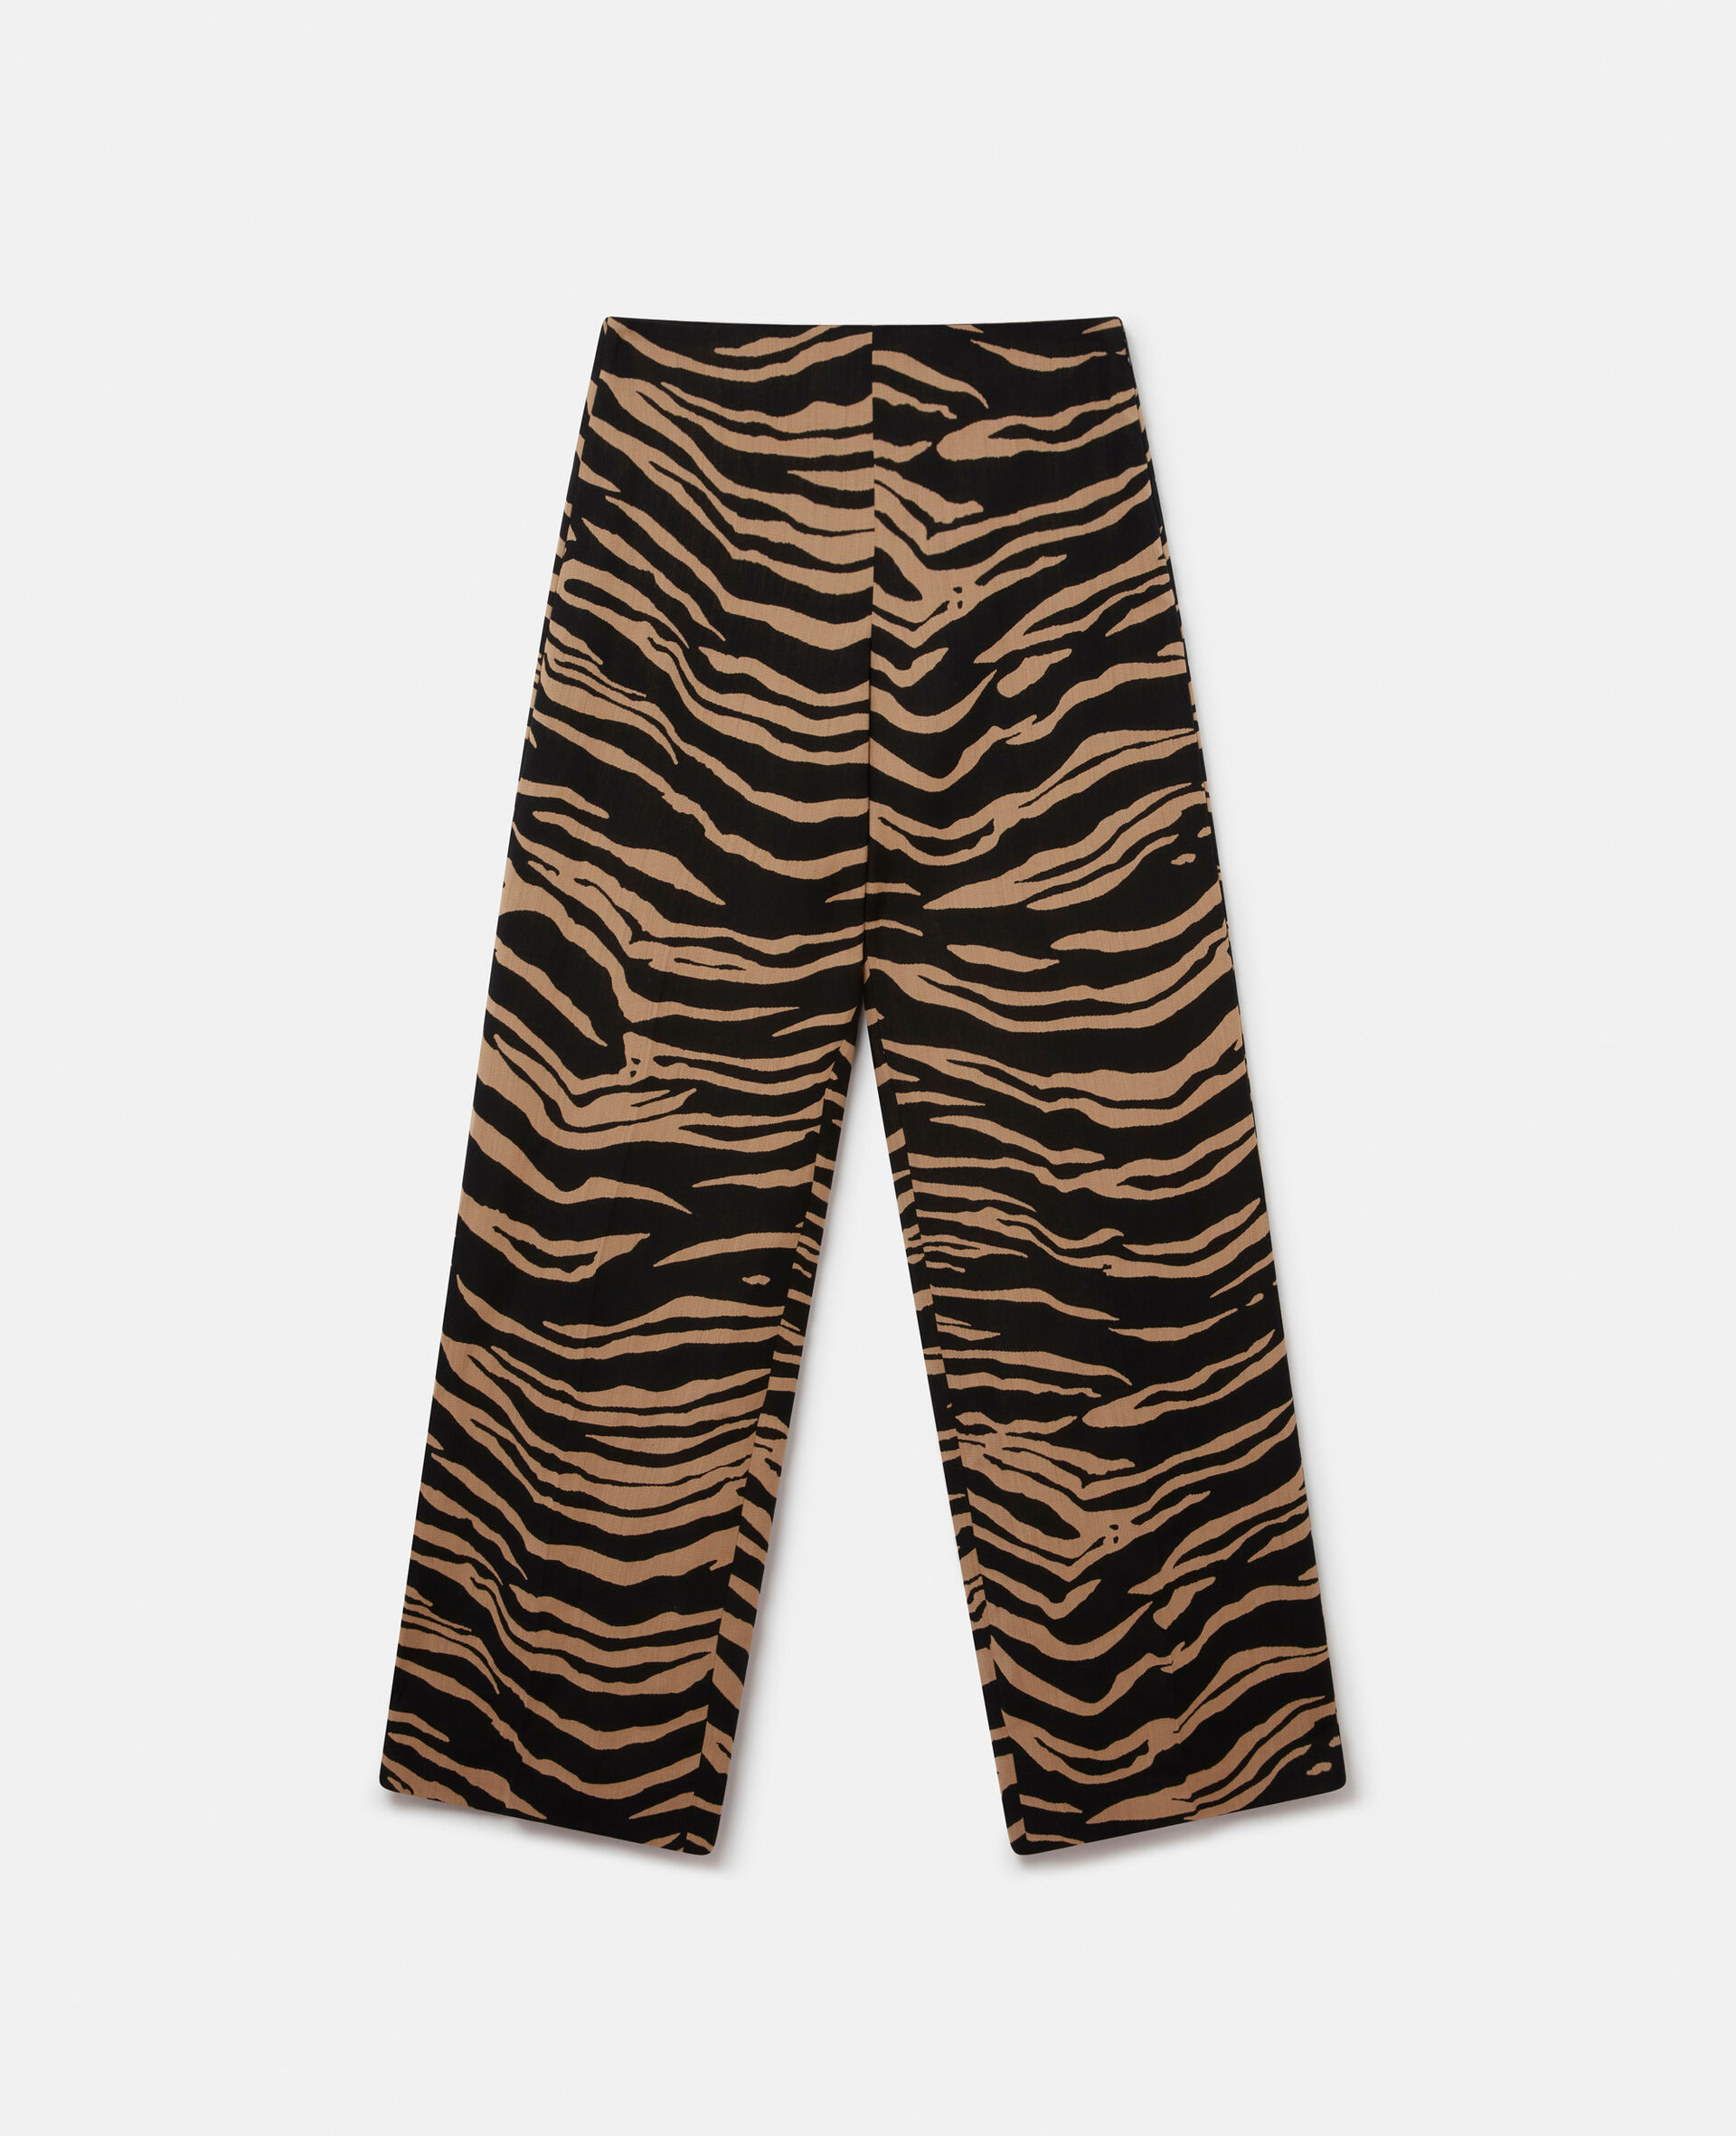 Tiger Print Tailored Straight Leg Trousers-Beige-large